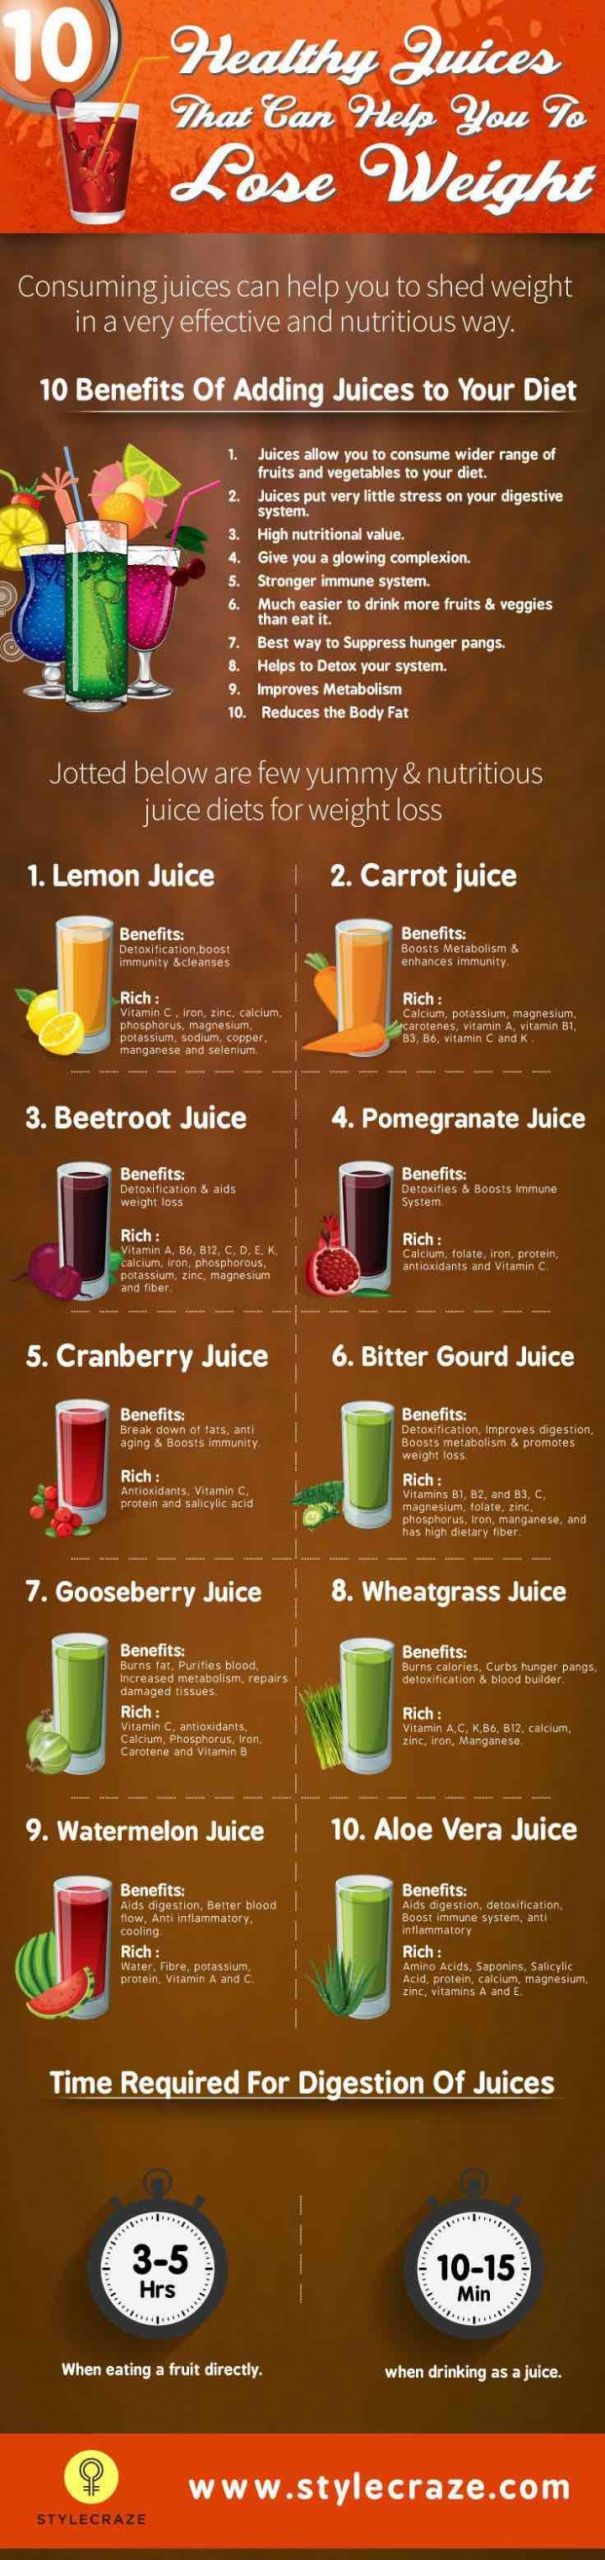 Juicing Recipes Weight Loss
 Juicing Recipes for Detoxing and Weight Loss MODwedding